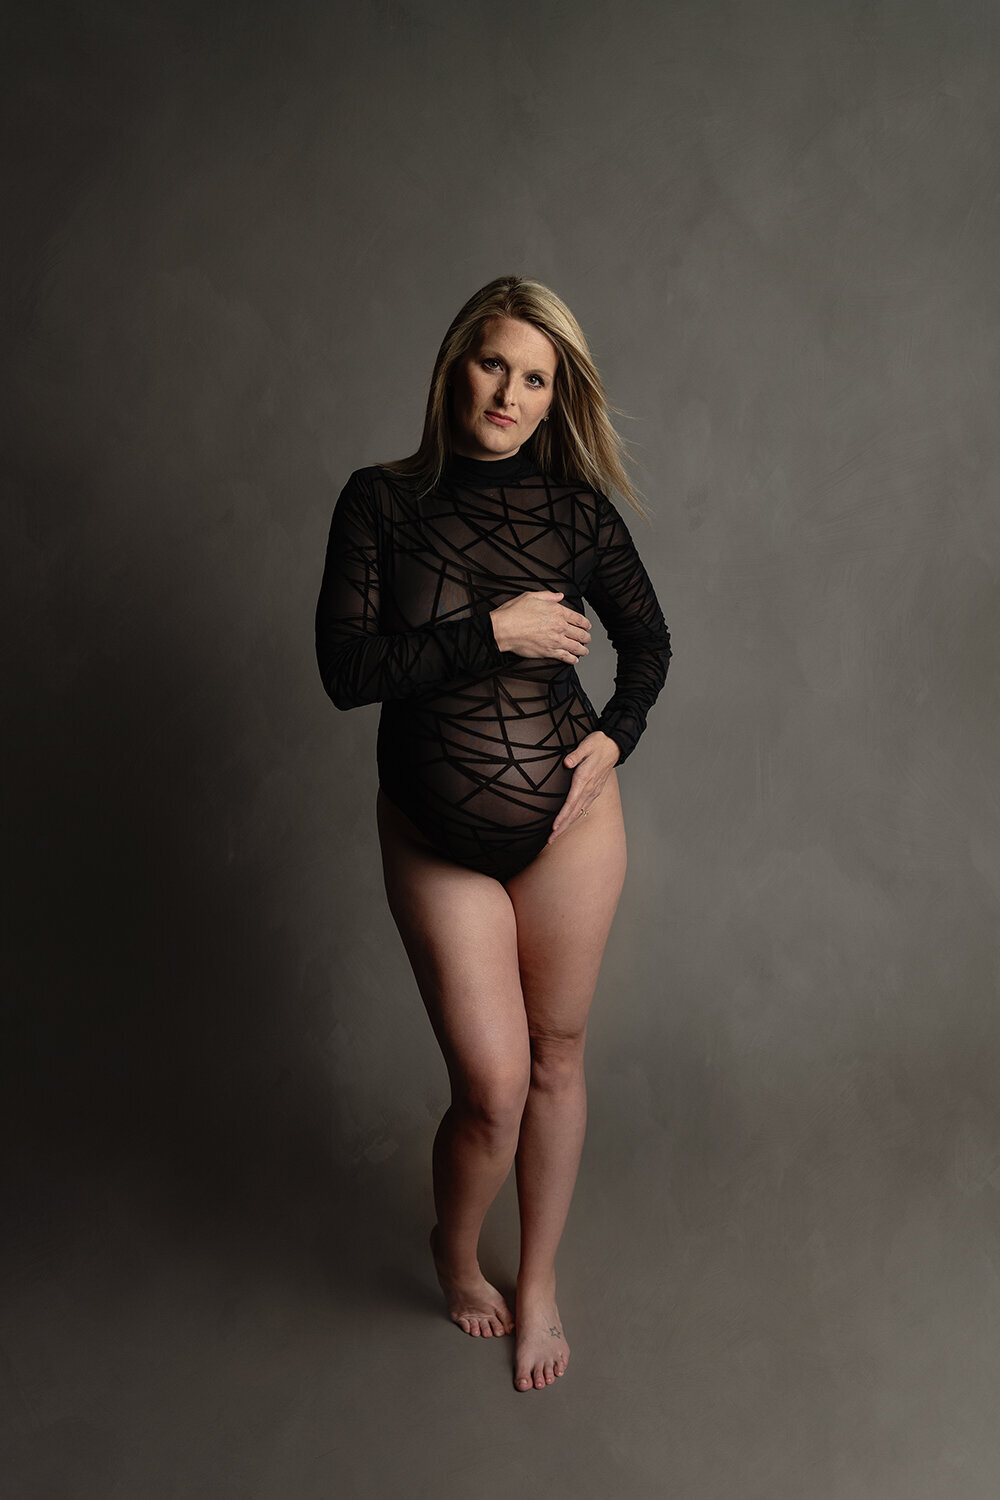 A mother to be stands in a studio with one hand on the bump in a black sheet maternity one-piece